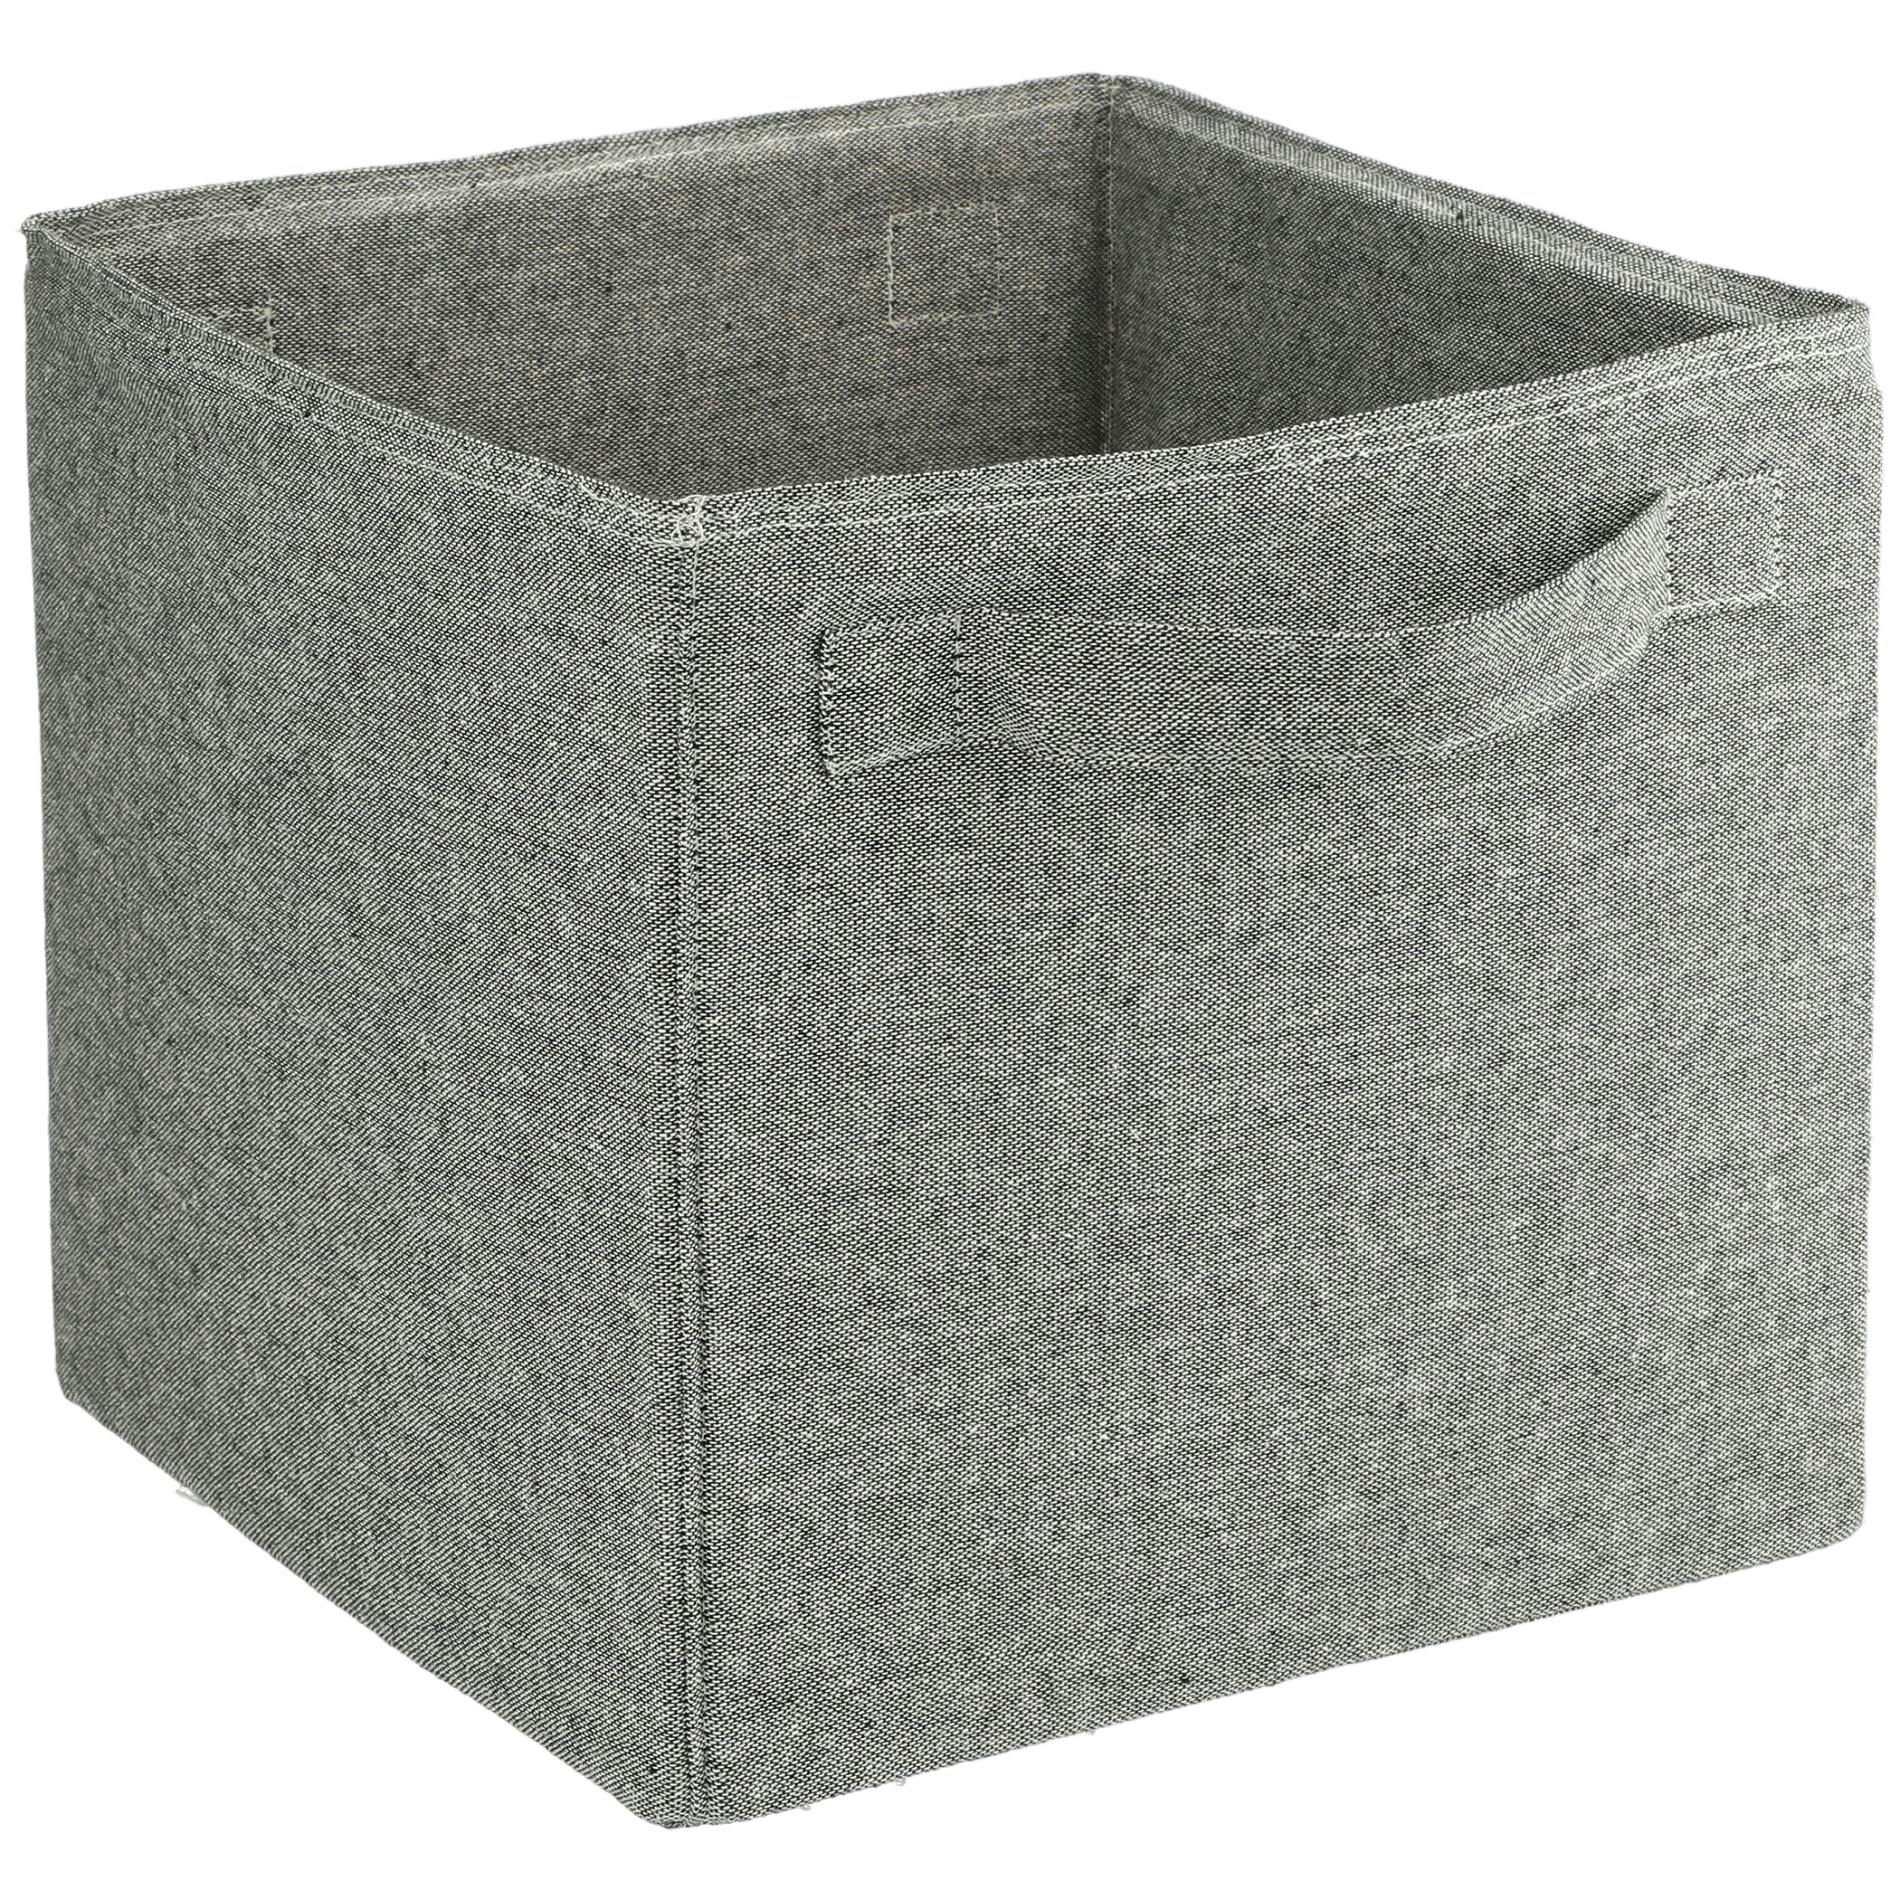 Recycled Cotton Storage Cube - additional Image 4